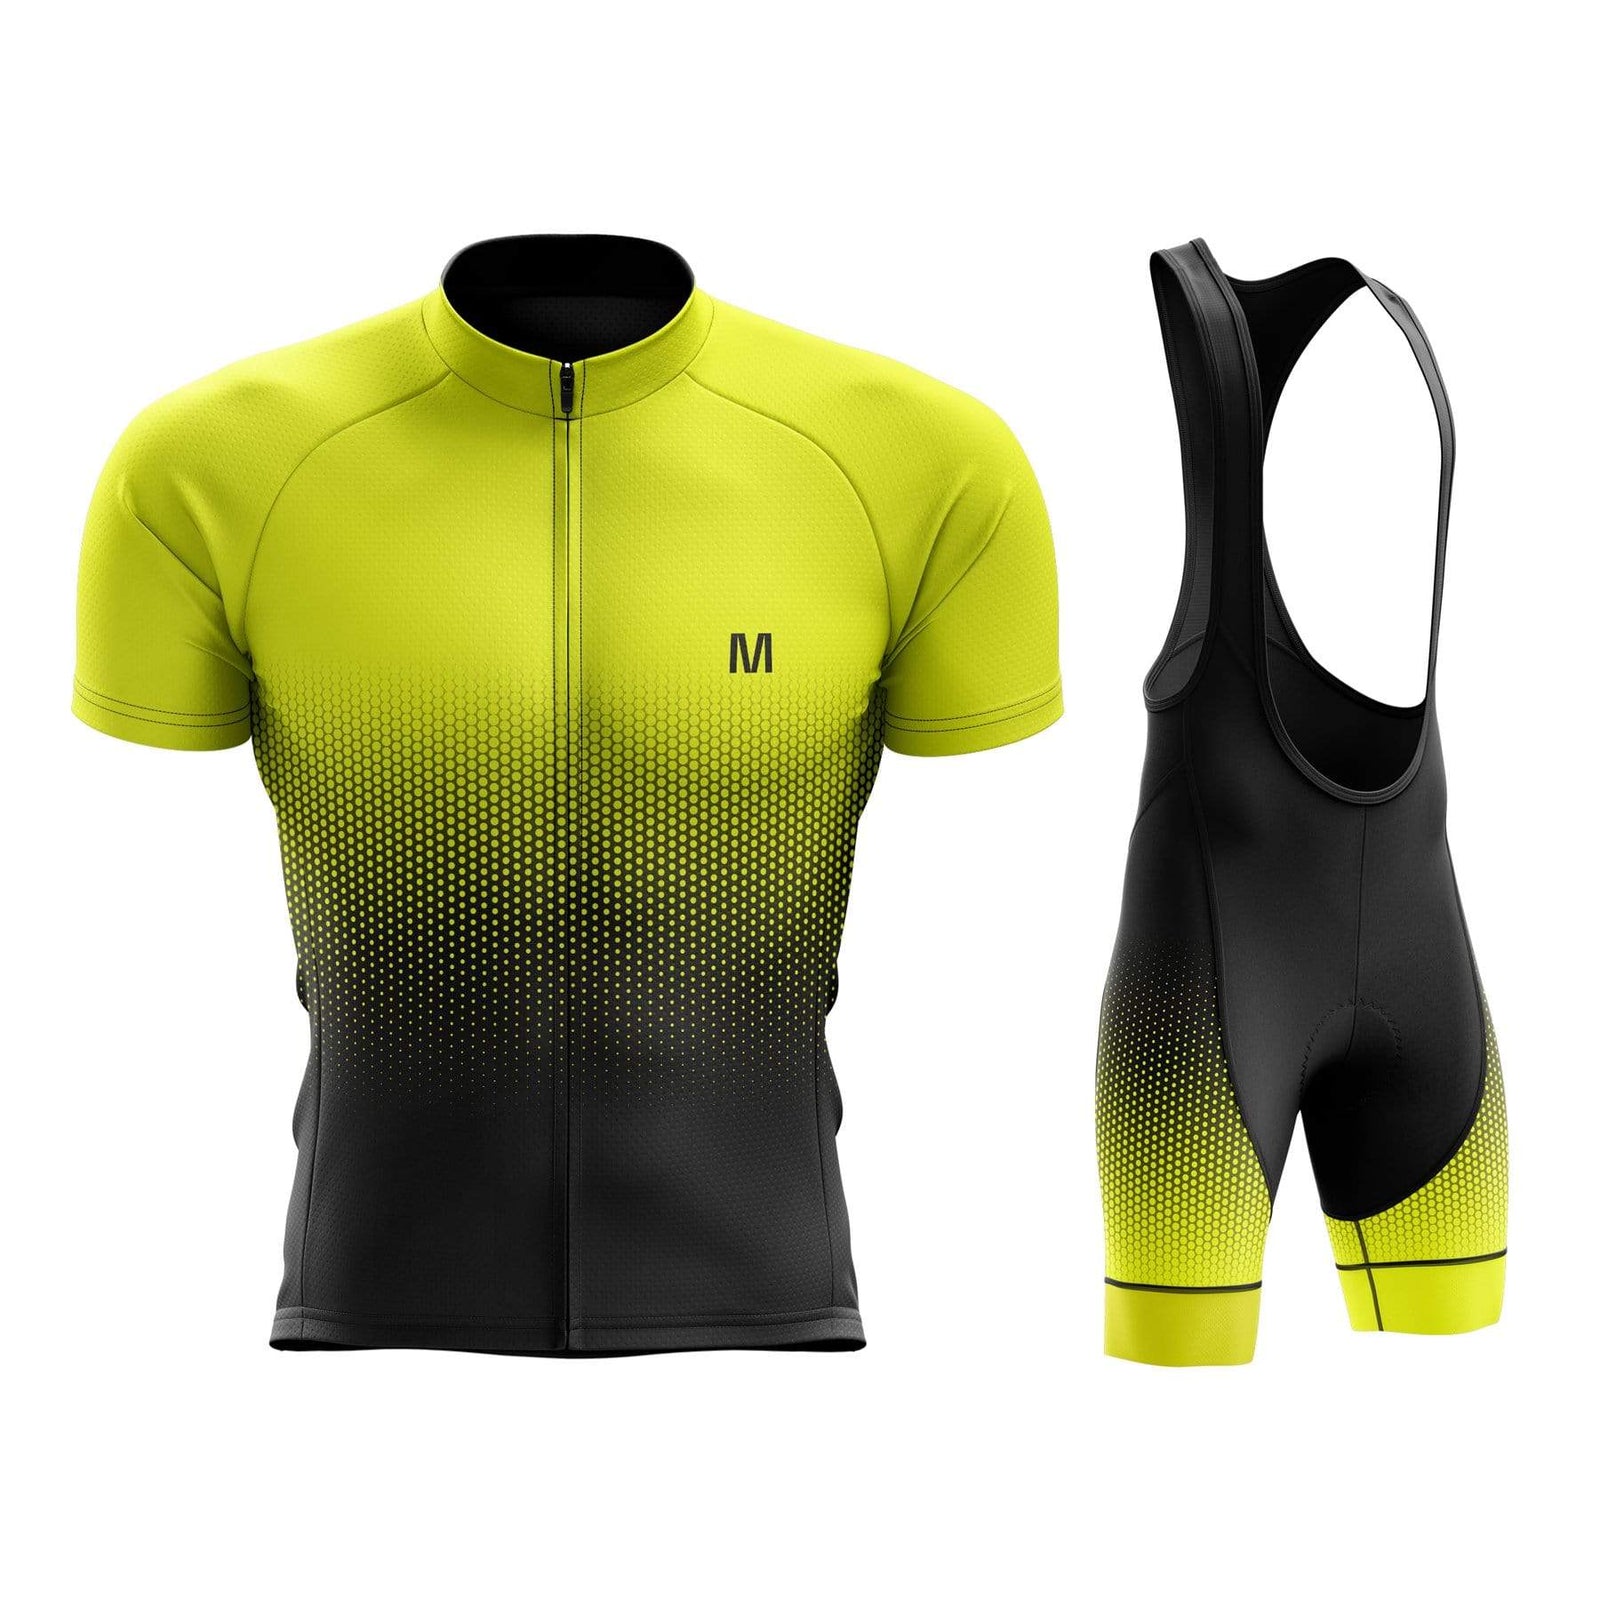 Montella Cycling Men's Yellow Gradient Cycling Jersey or Bibs